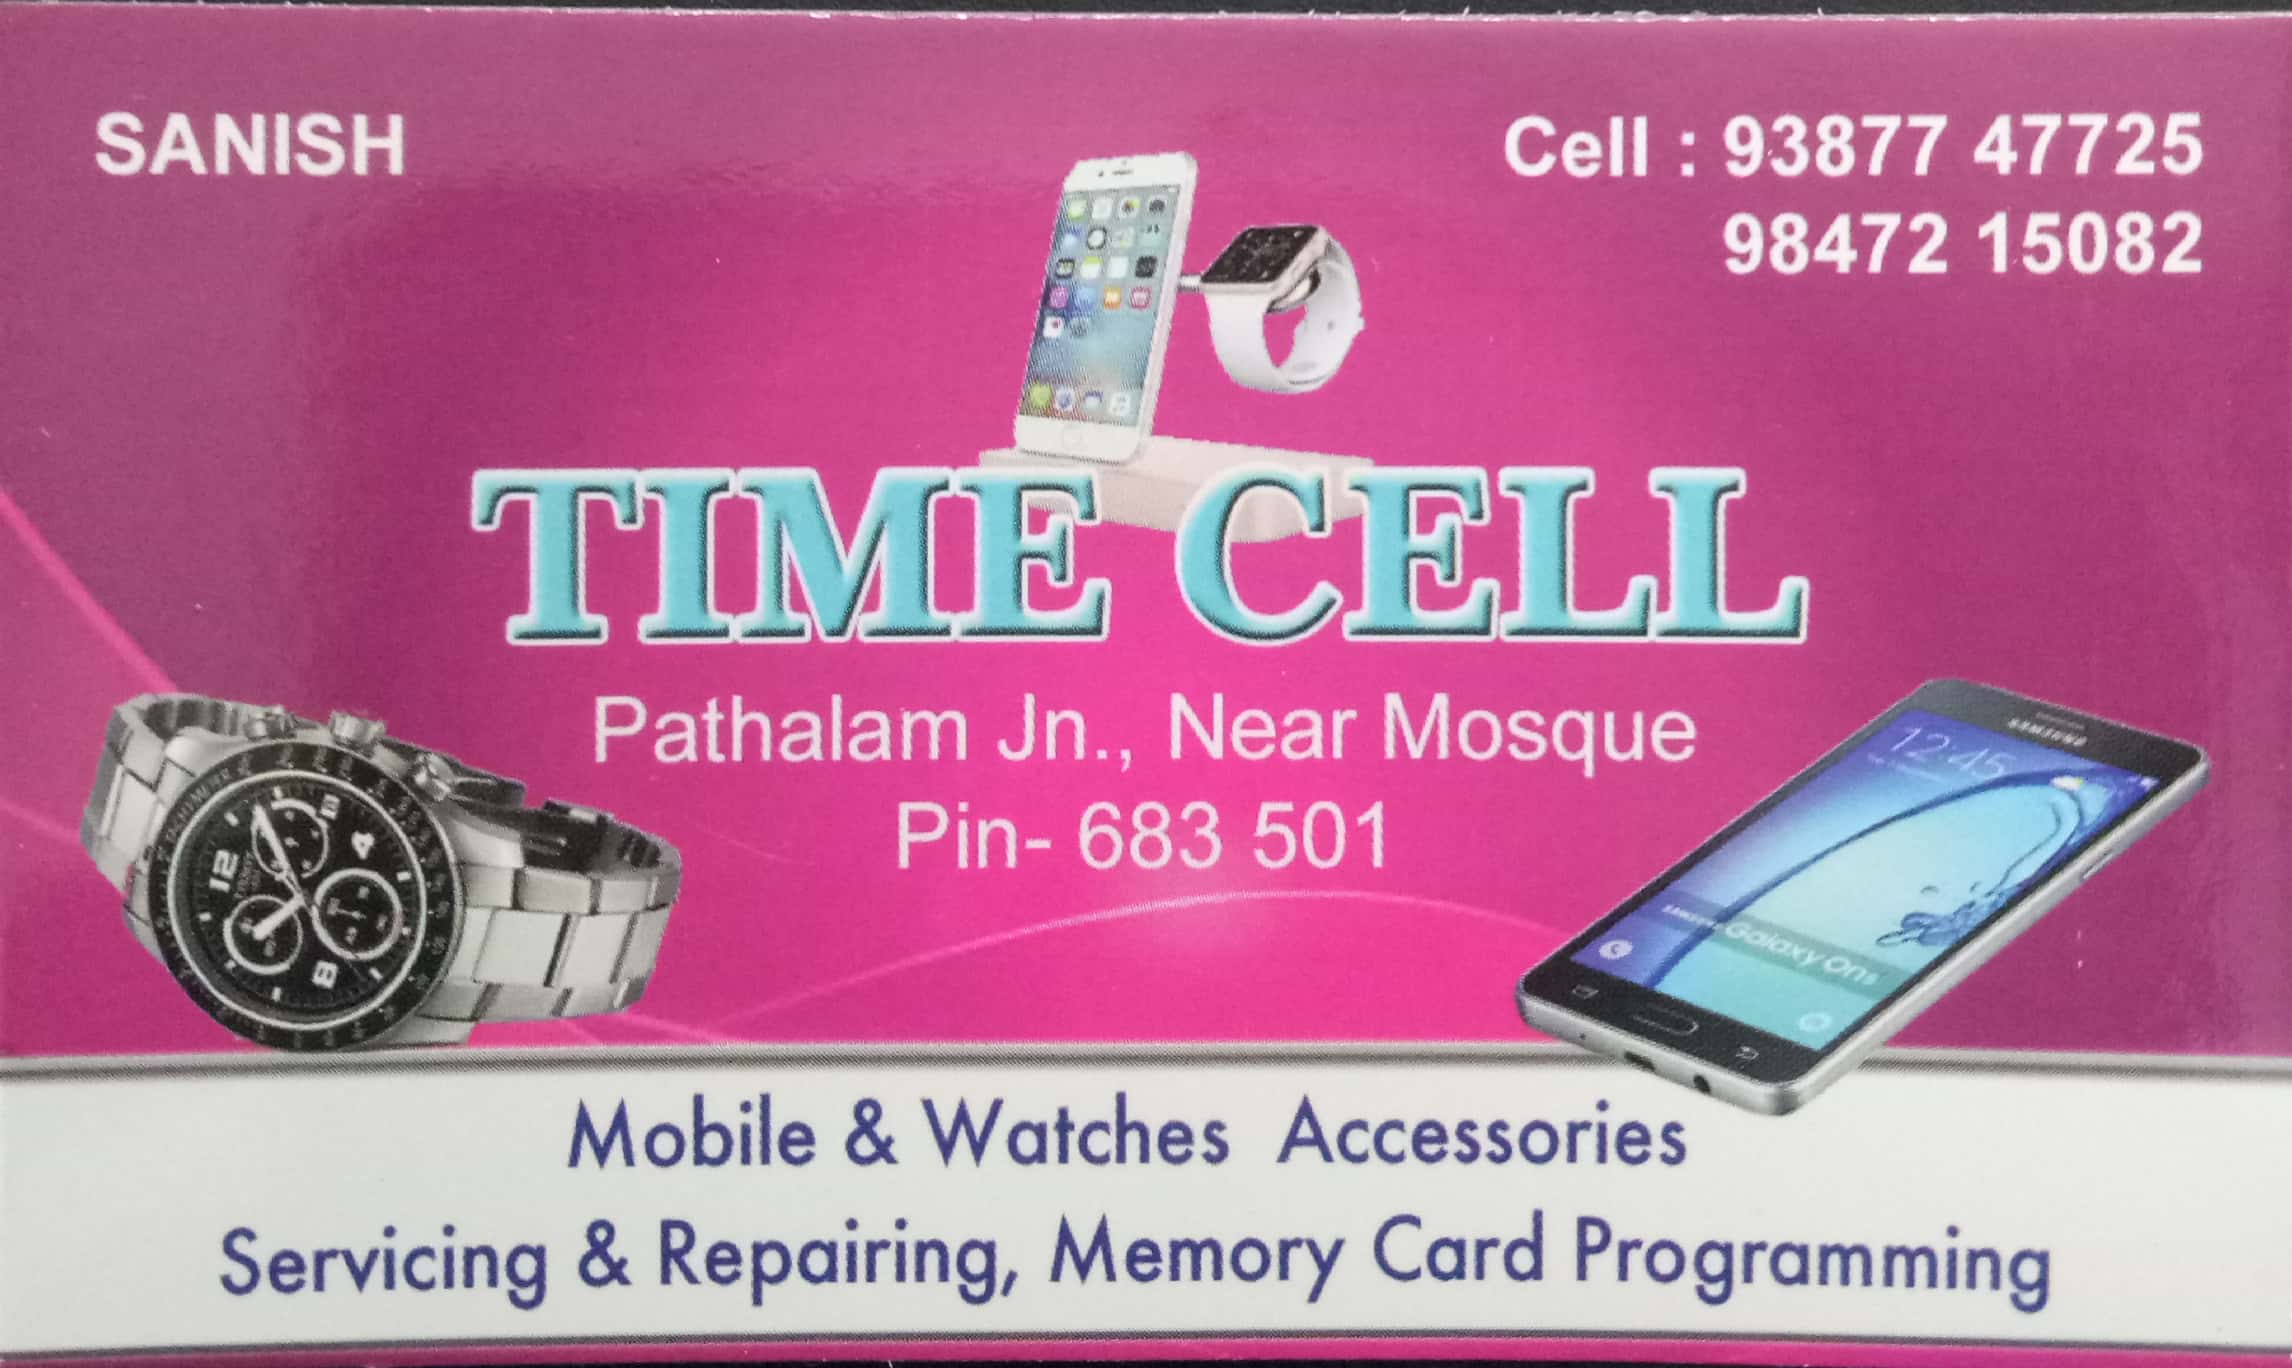 TIME CELL, MOBILE SHOP,  service in Aluva, Ernakulam